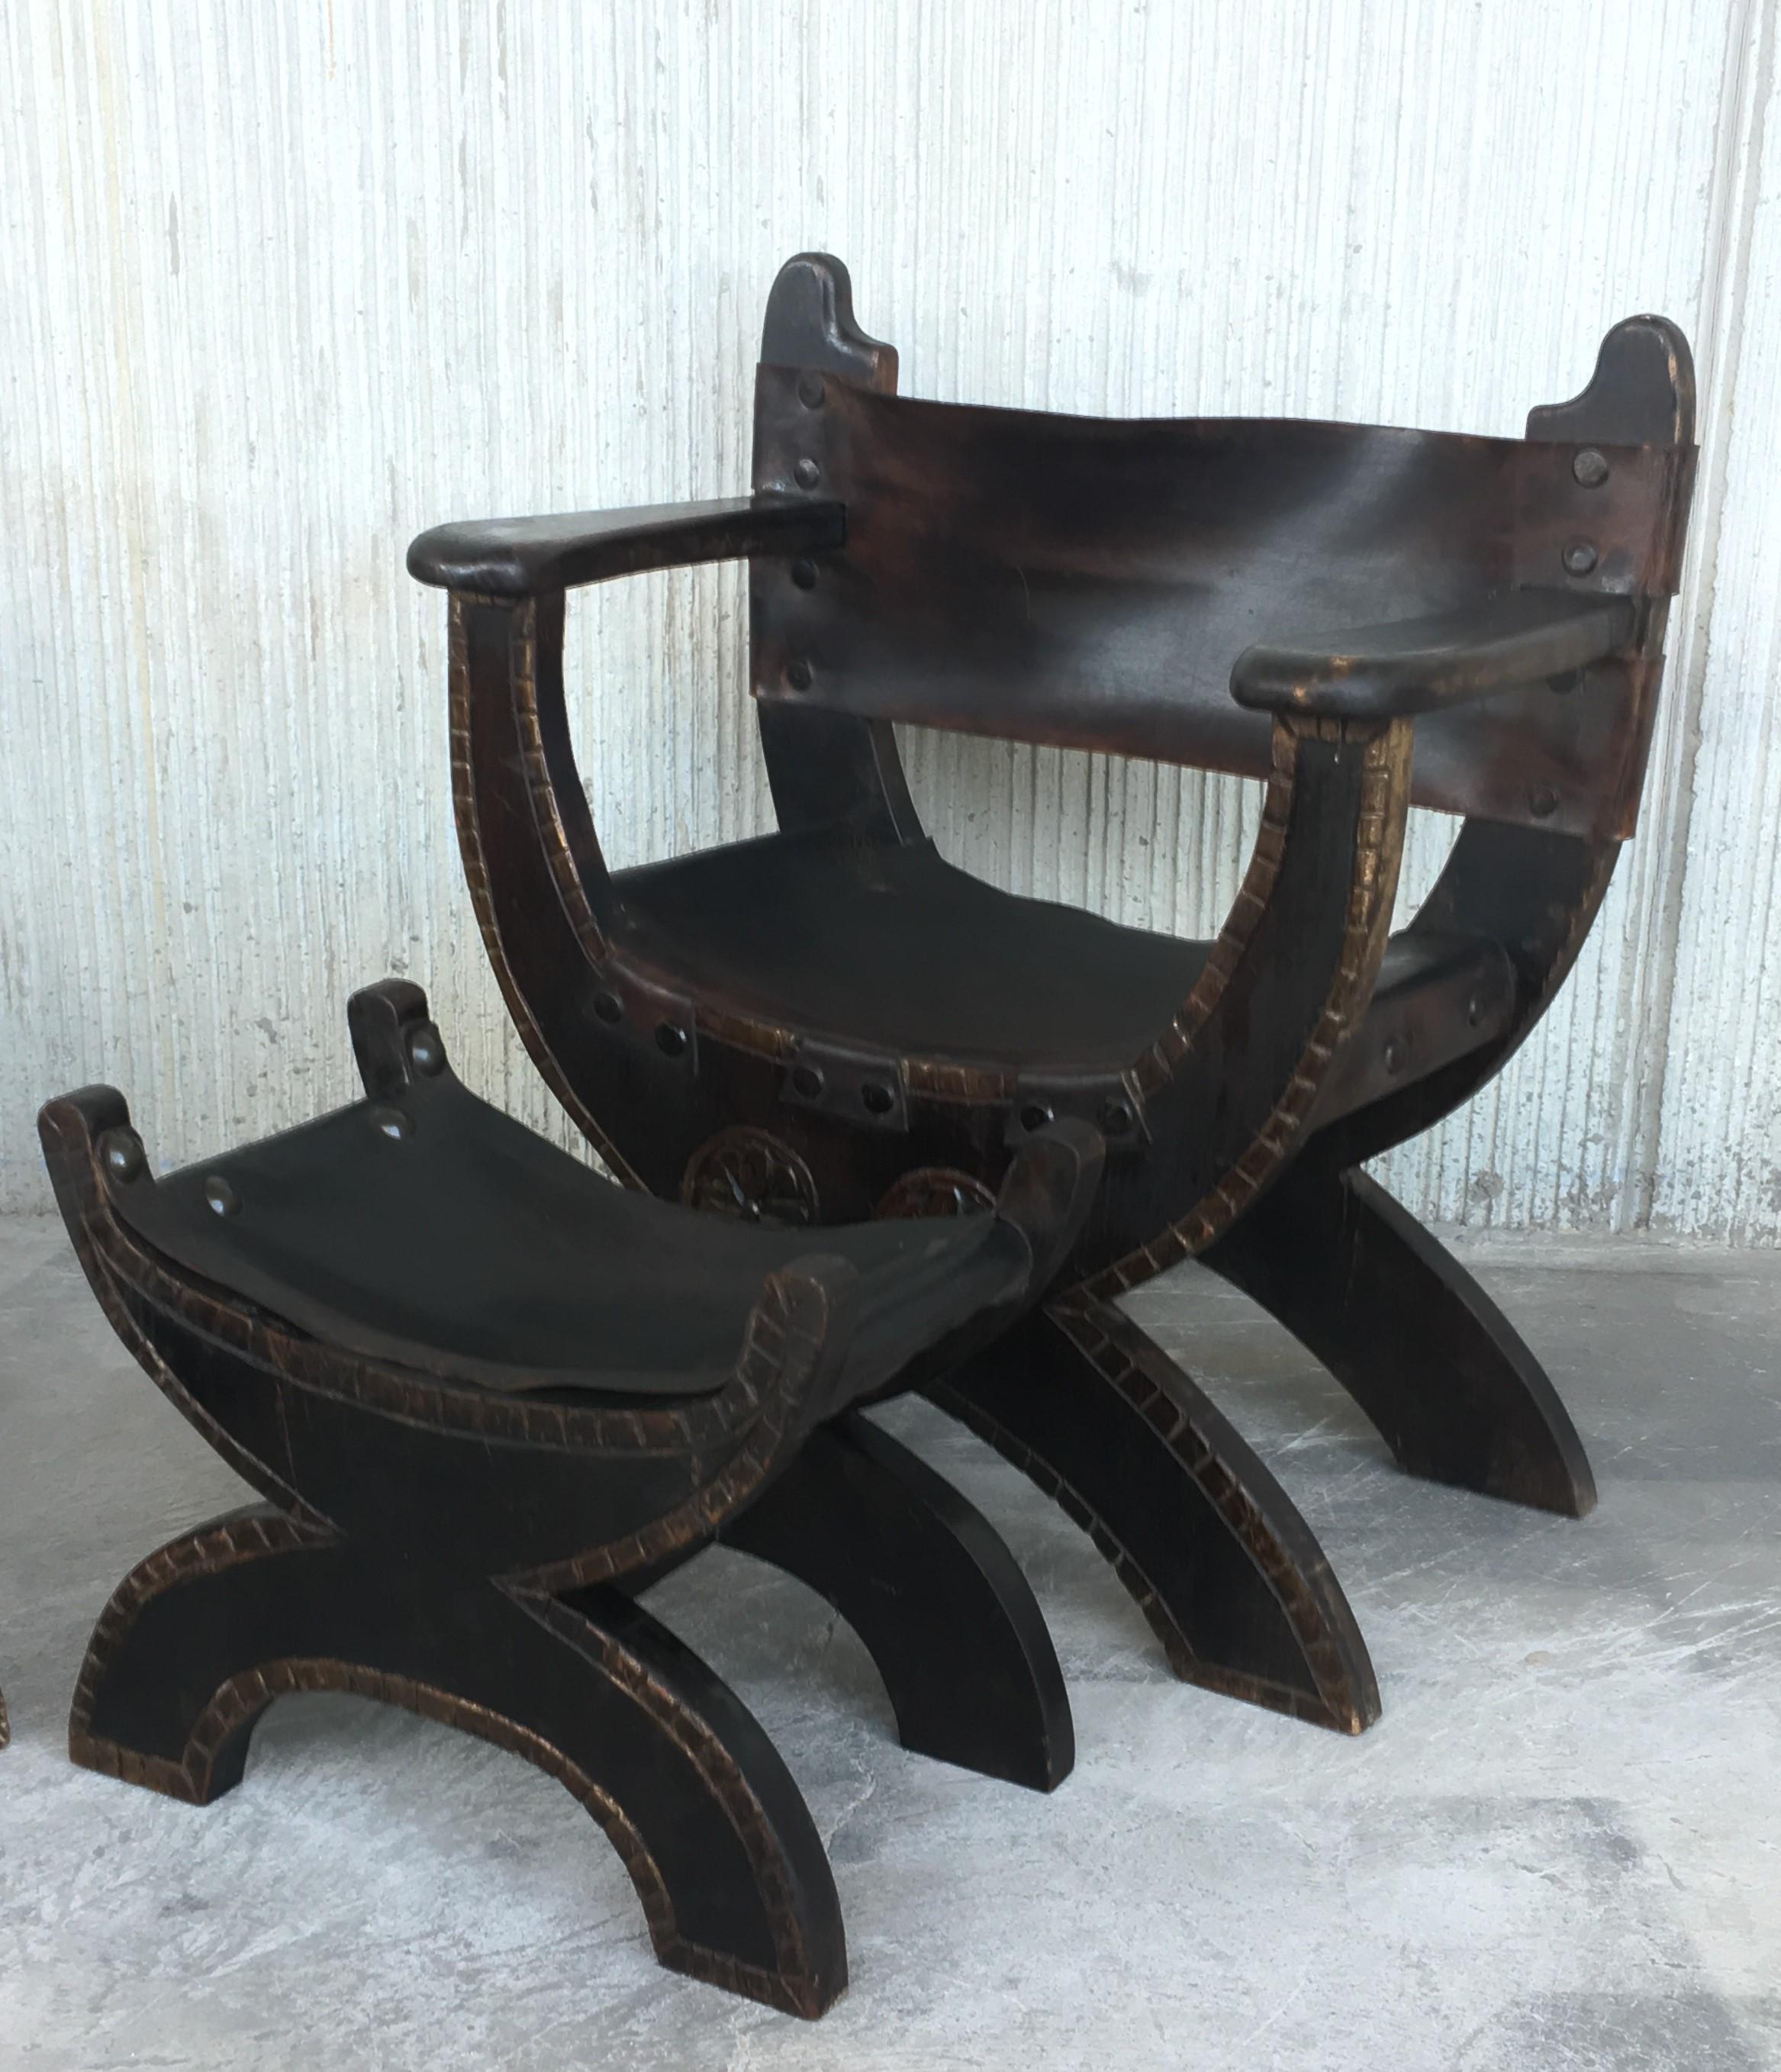 Baroque Revival 20th Century Pair of Carved Walnut Spanish Savonarola with Foot Rest For Sale